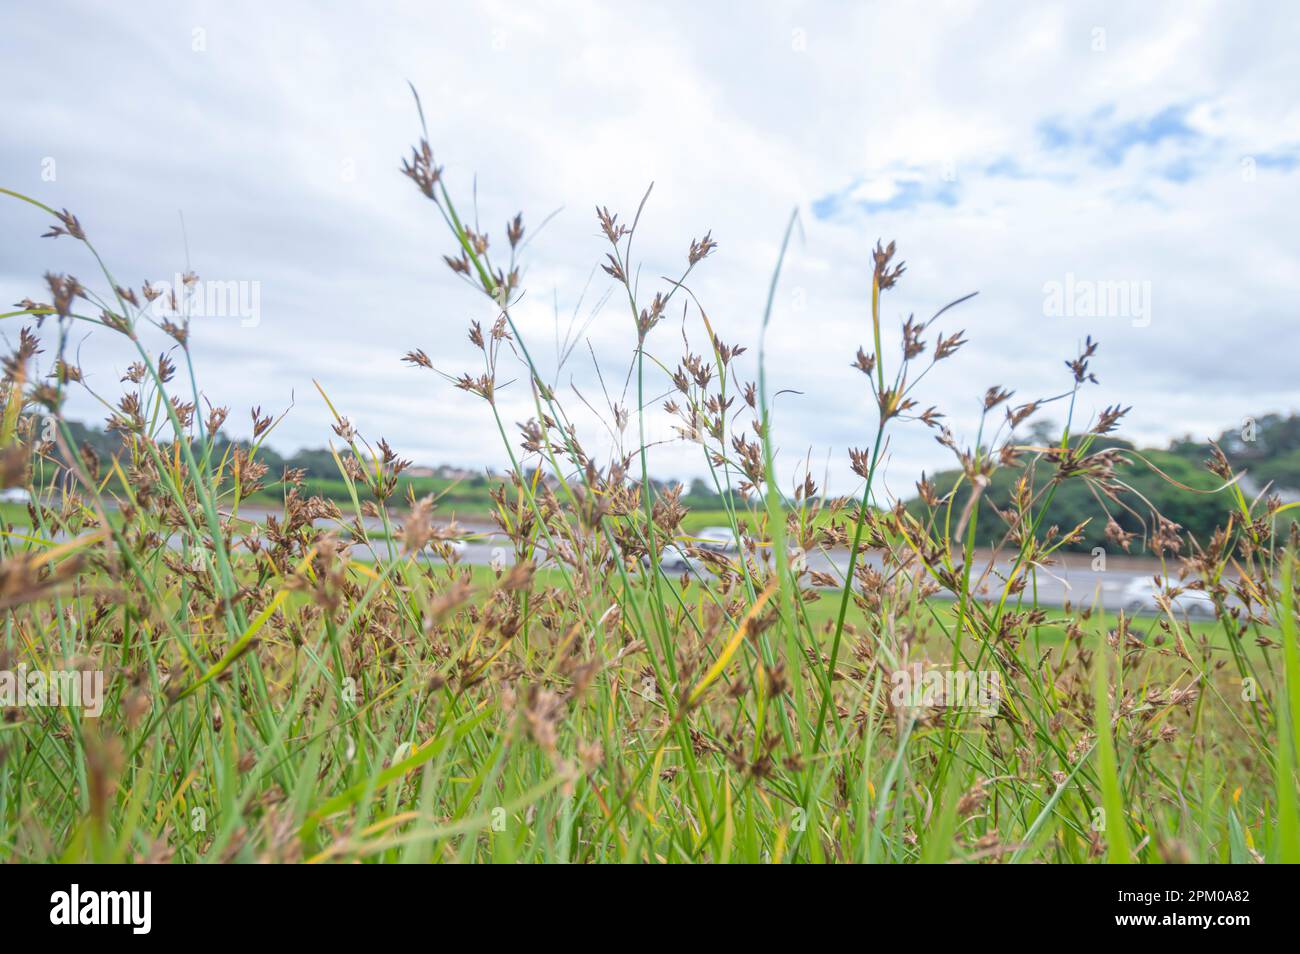 Grass and weeds with blurry cars passing on a highway in the background. Stock Photo